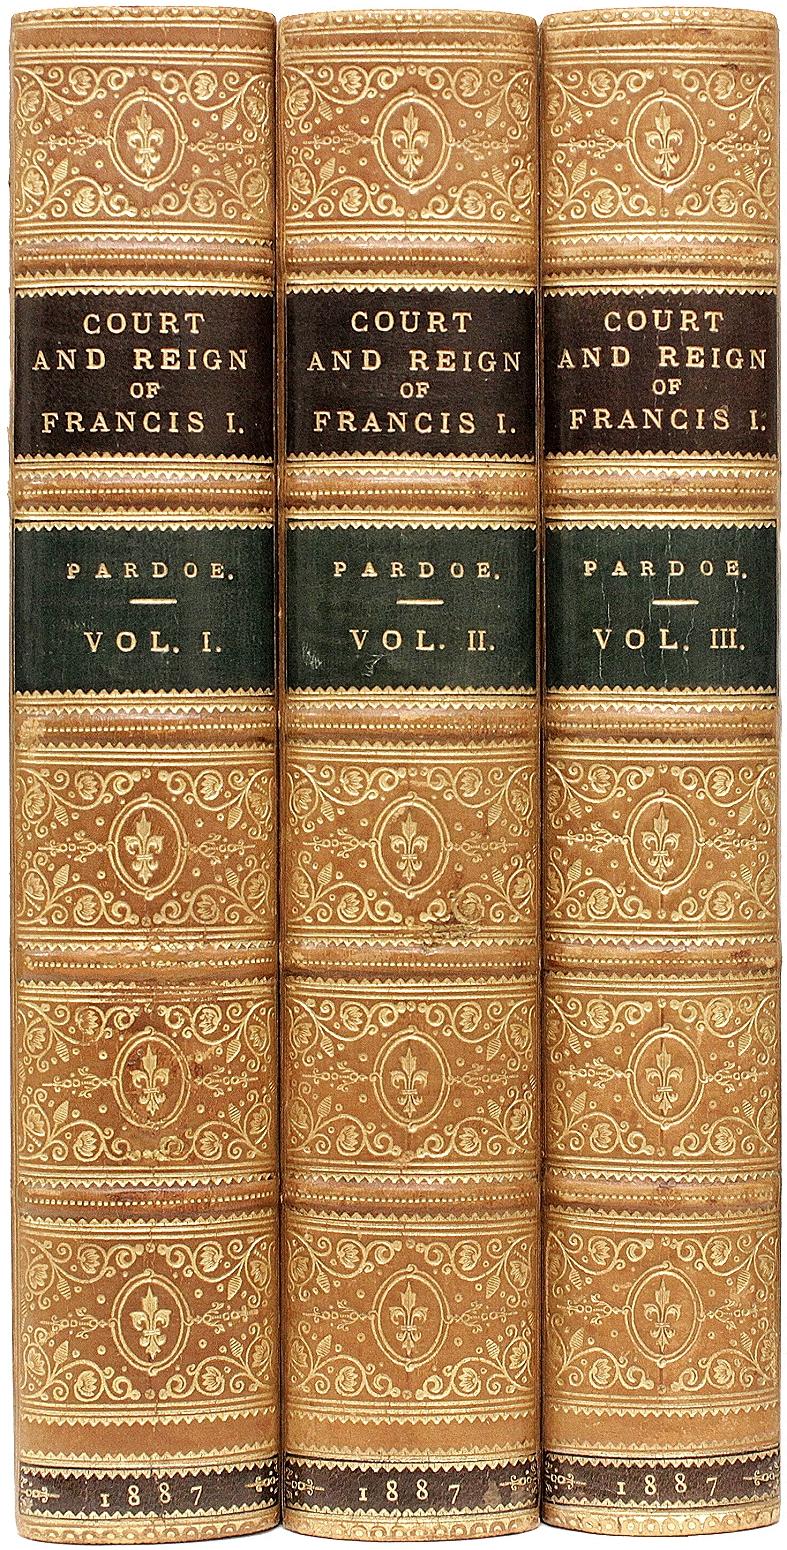 AUTHOR: PARDOE, Julia. 

TITLE: The Court And Reign Of Francis The First King Of France.

PUBLISHER: London: Richard Bentley and Son, 1887

DESCRIPTION: 3 vols., 8-3/4